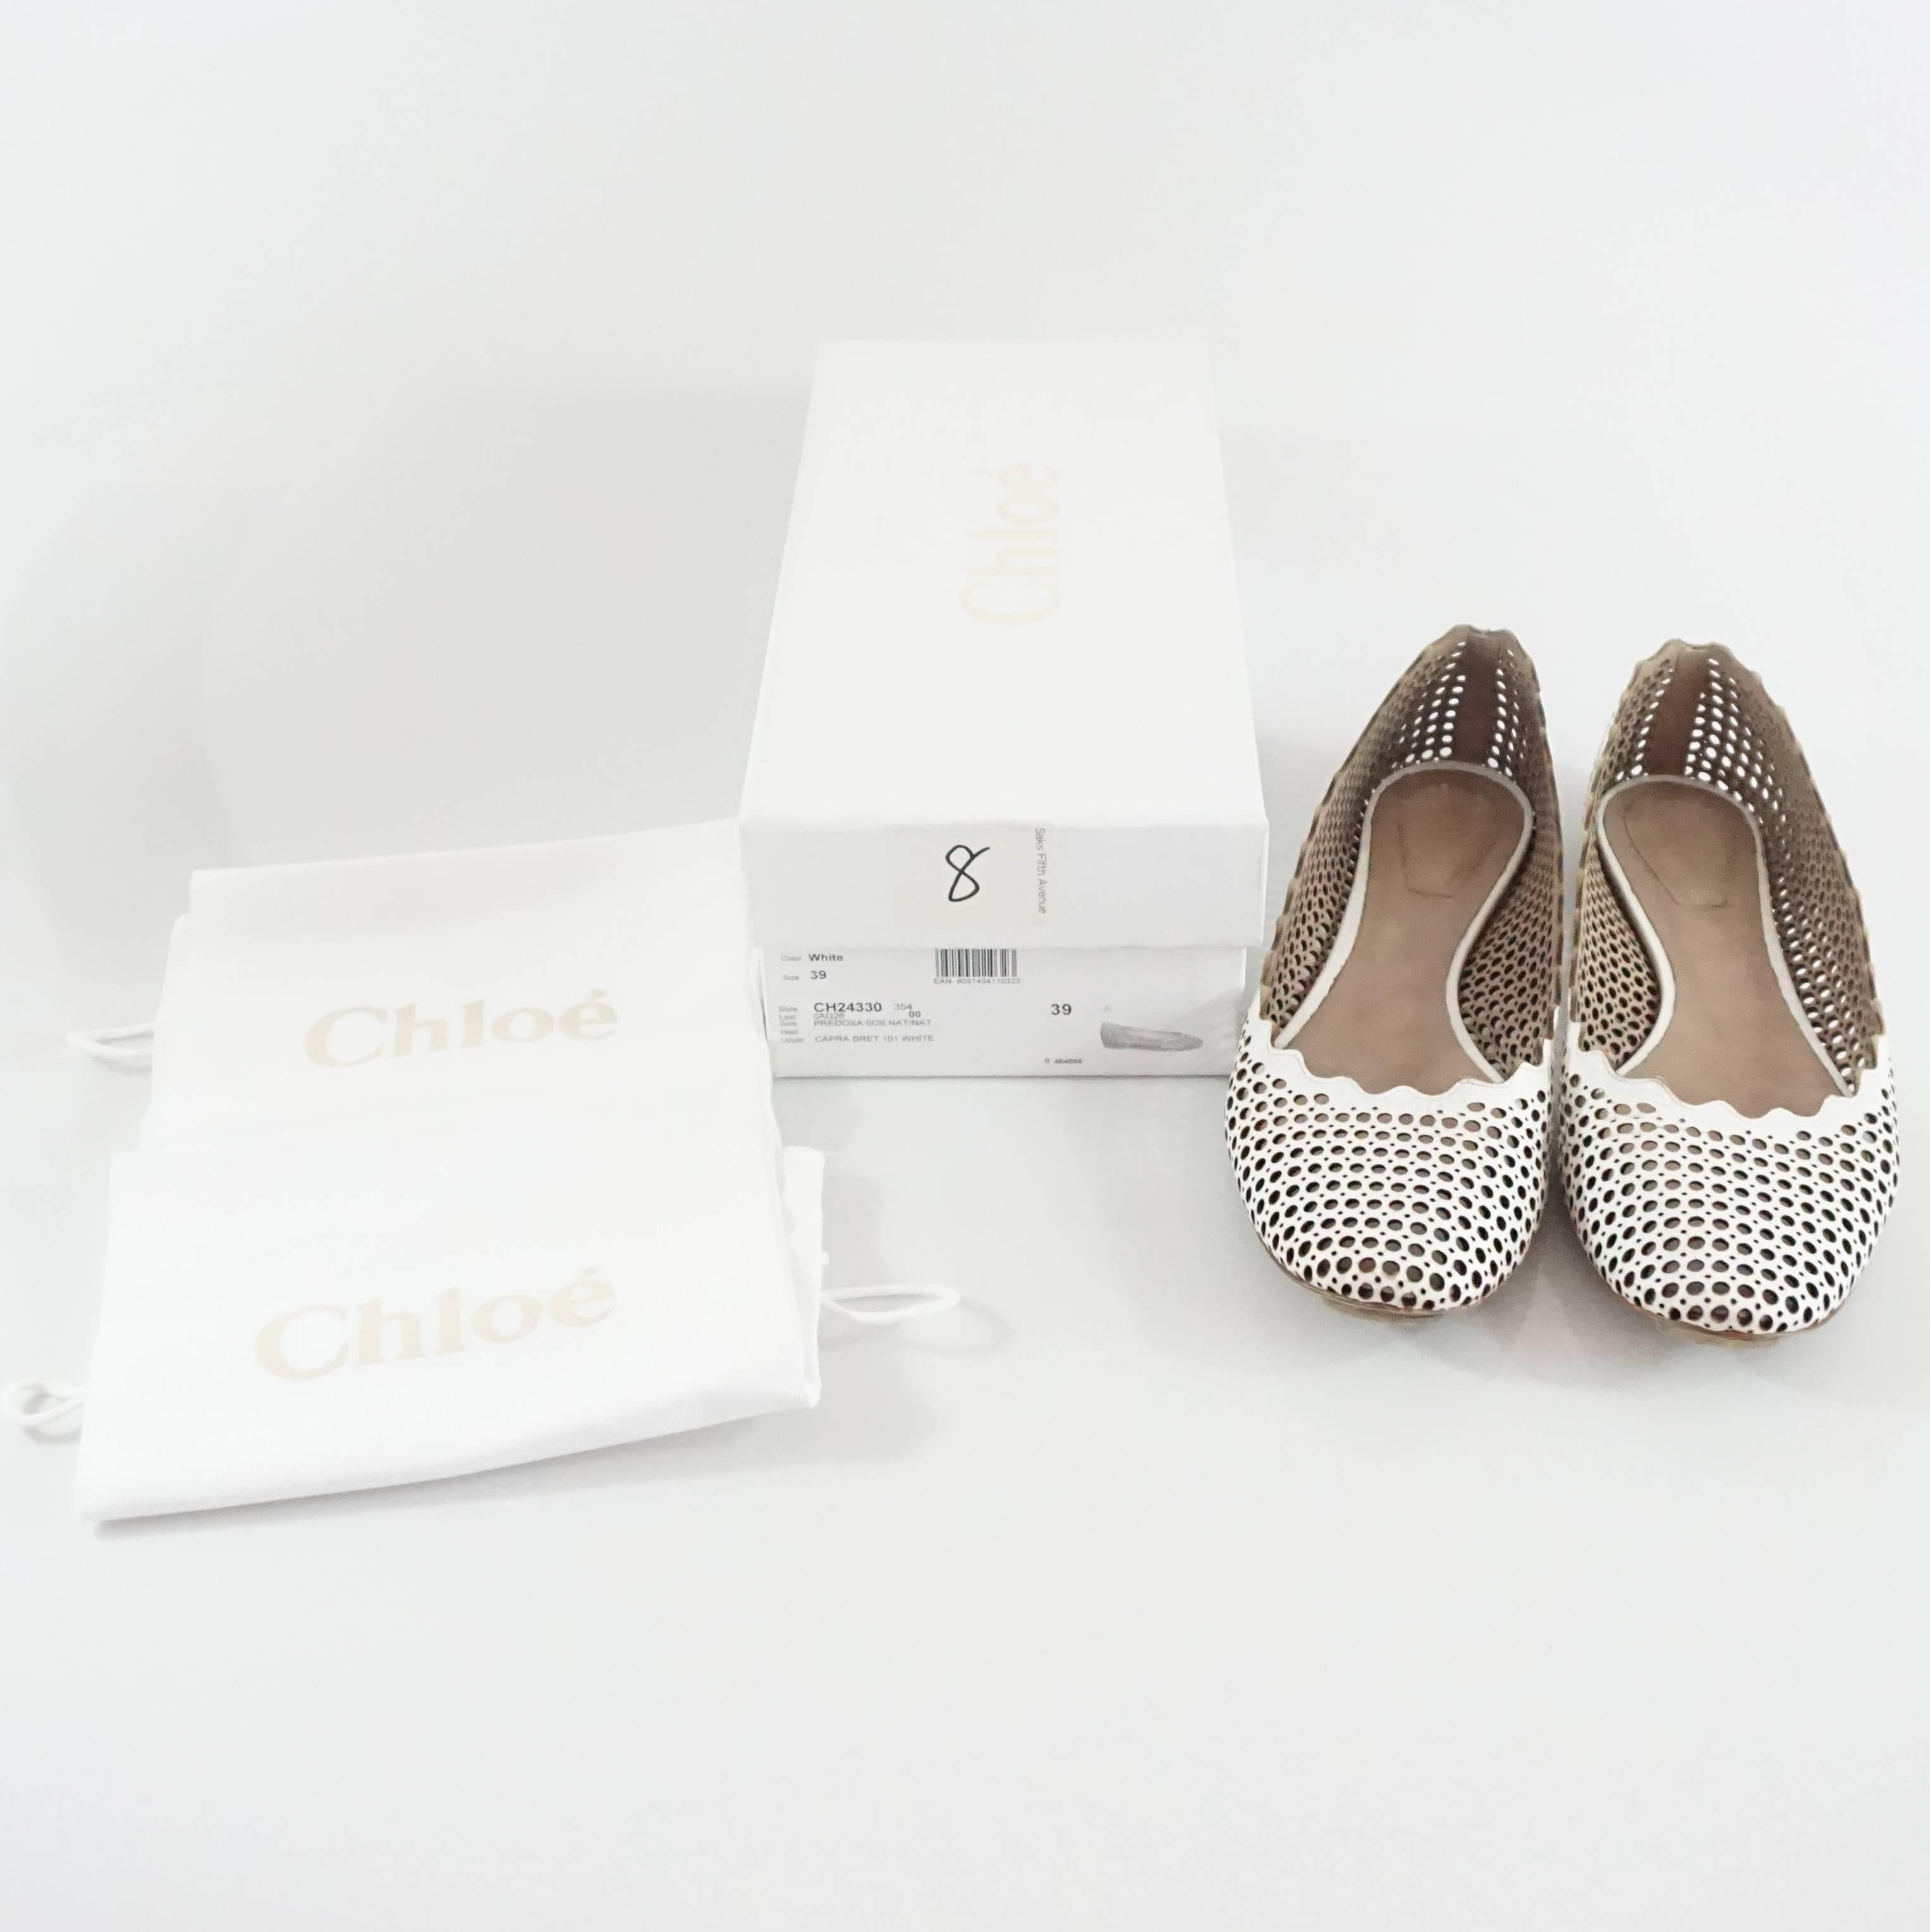 Chloe White Perforated Leather Ballet Flats – 39 3